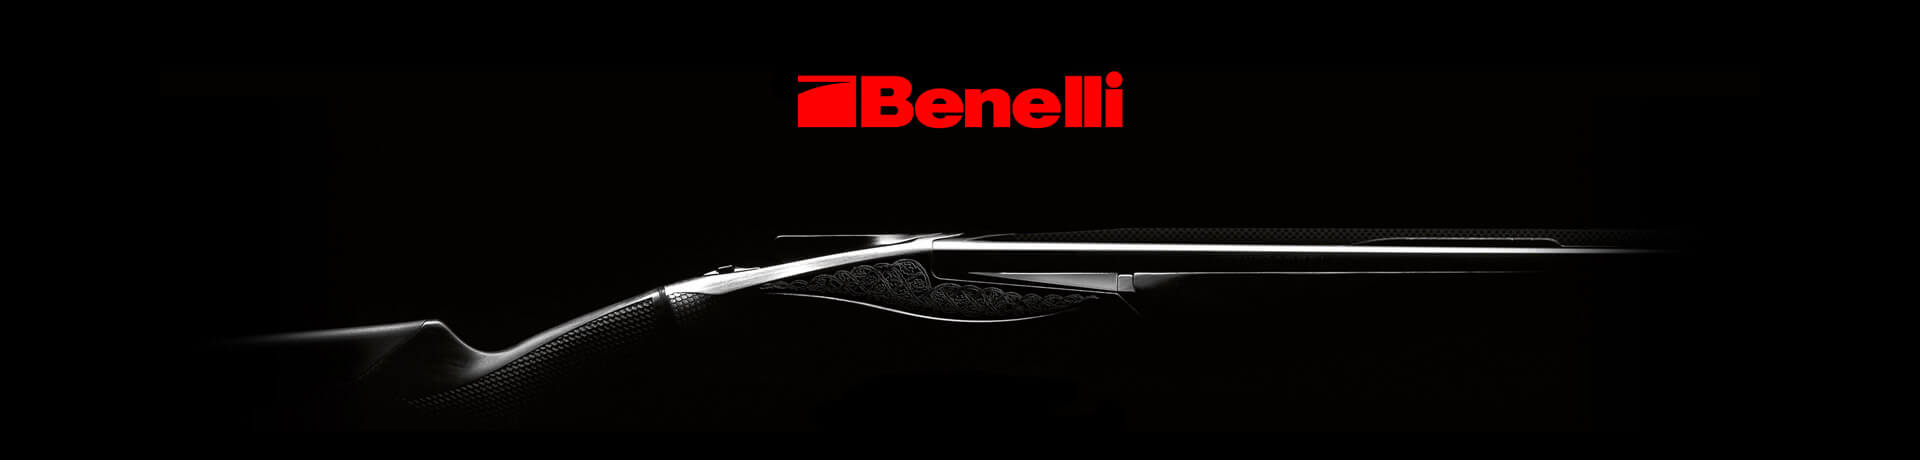 benelli banner home